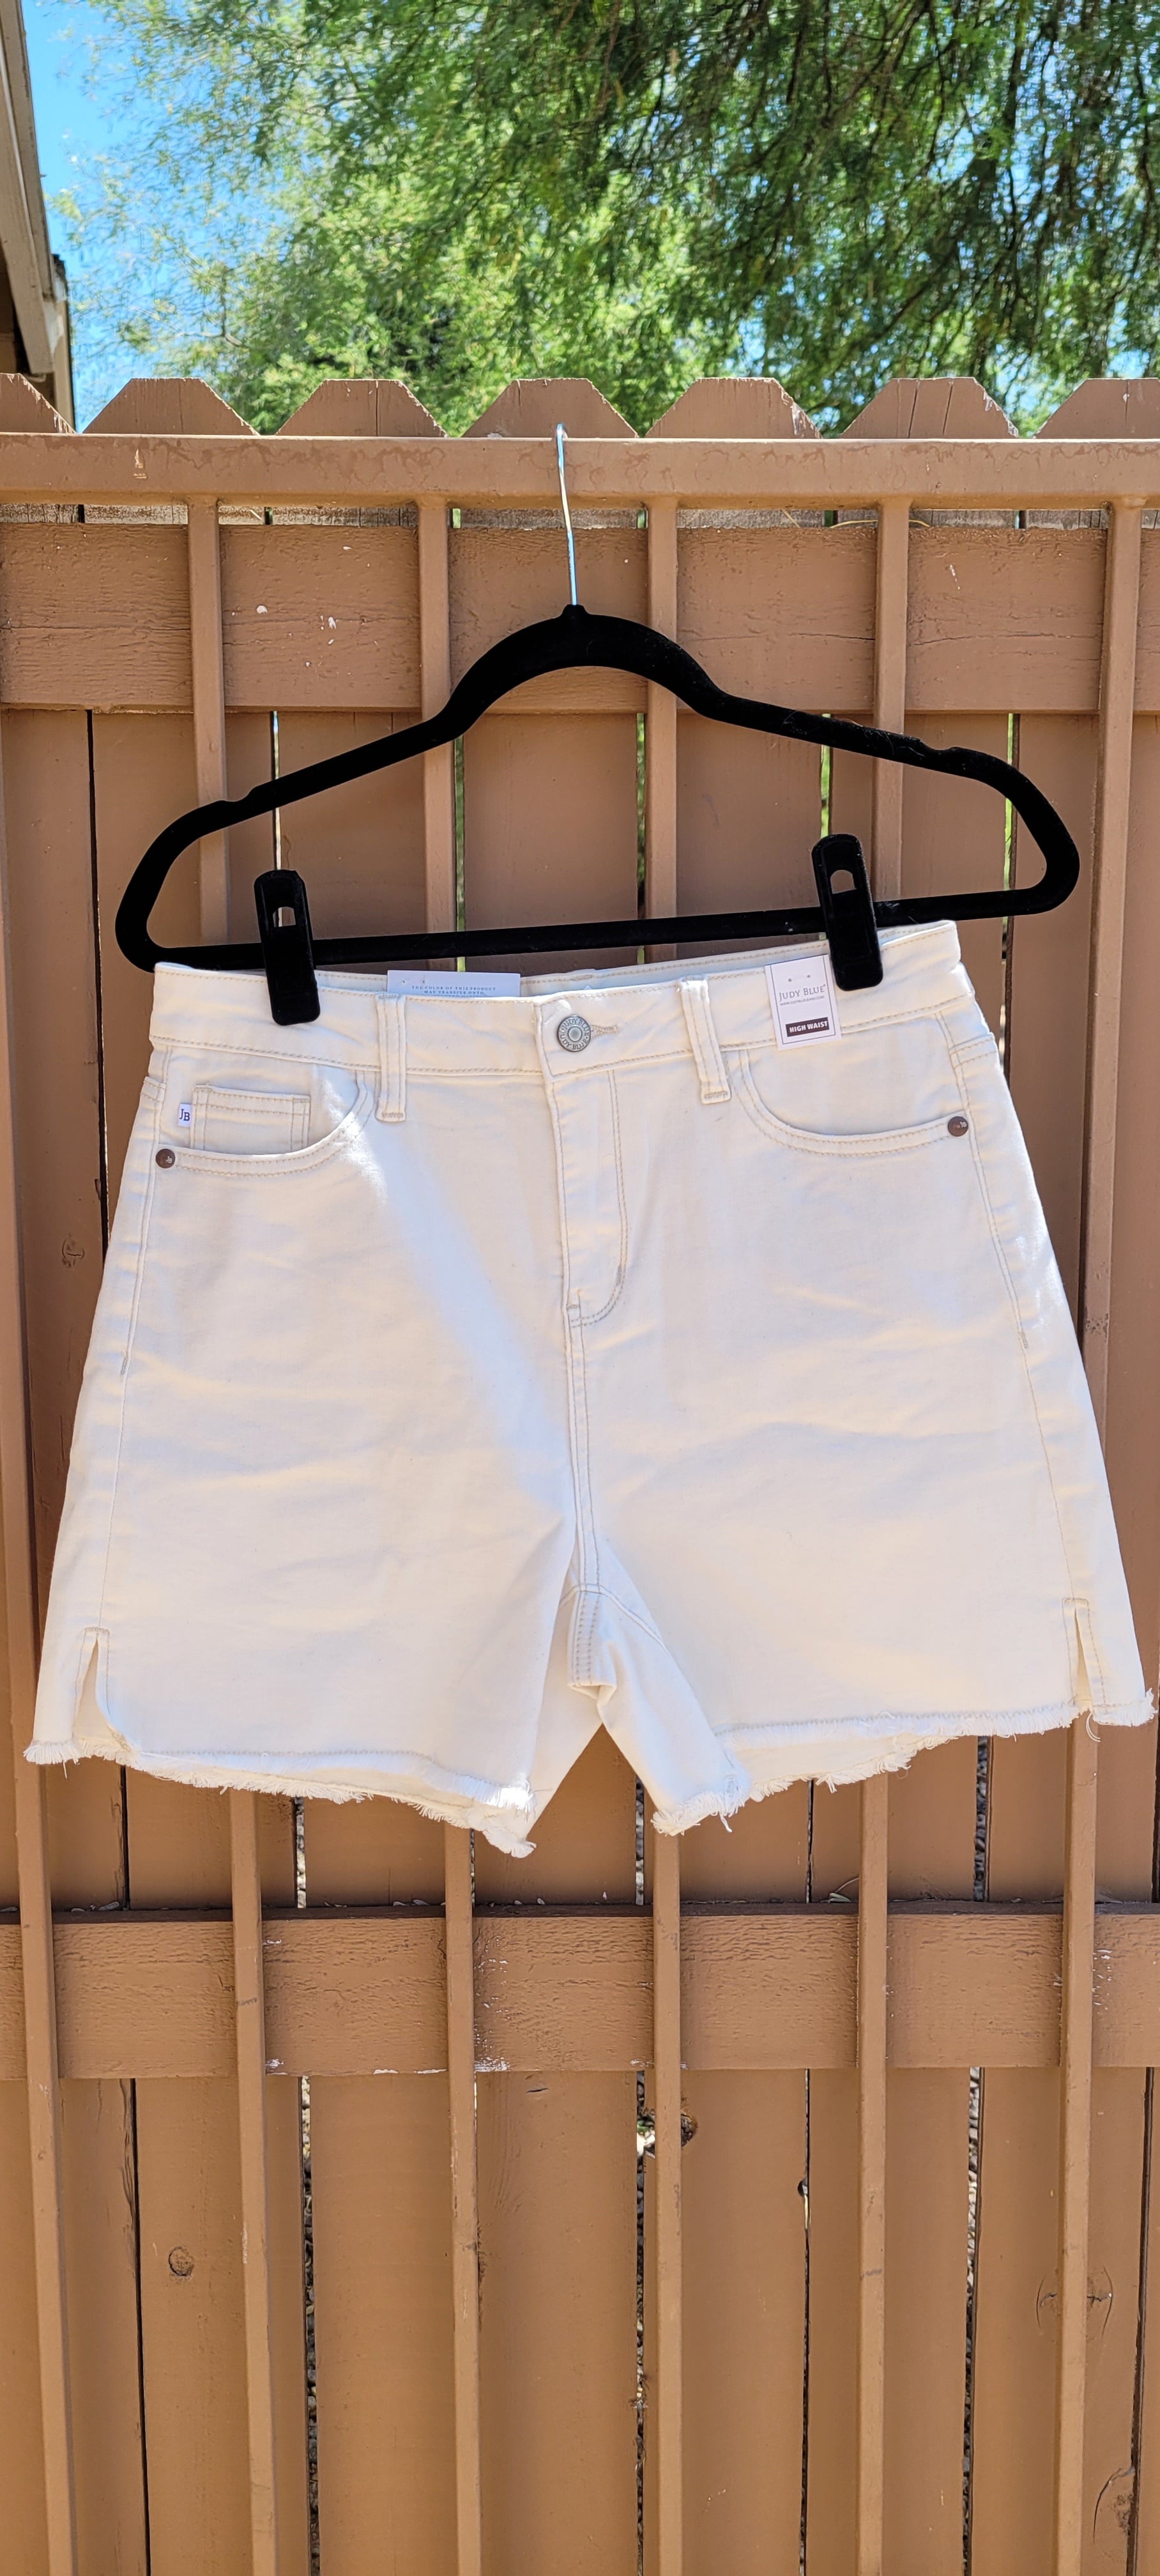 These are cream colored, high waist, non-distressed shorts featuring a frayed hemline, functional pockets in the front and back. These shorts are stretchy for comfort.  A great staple piece for your wardrobe. Size large.